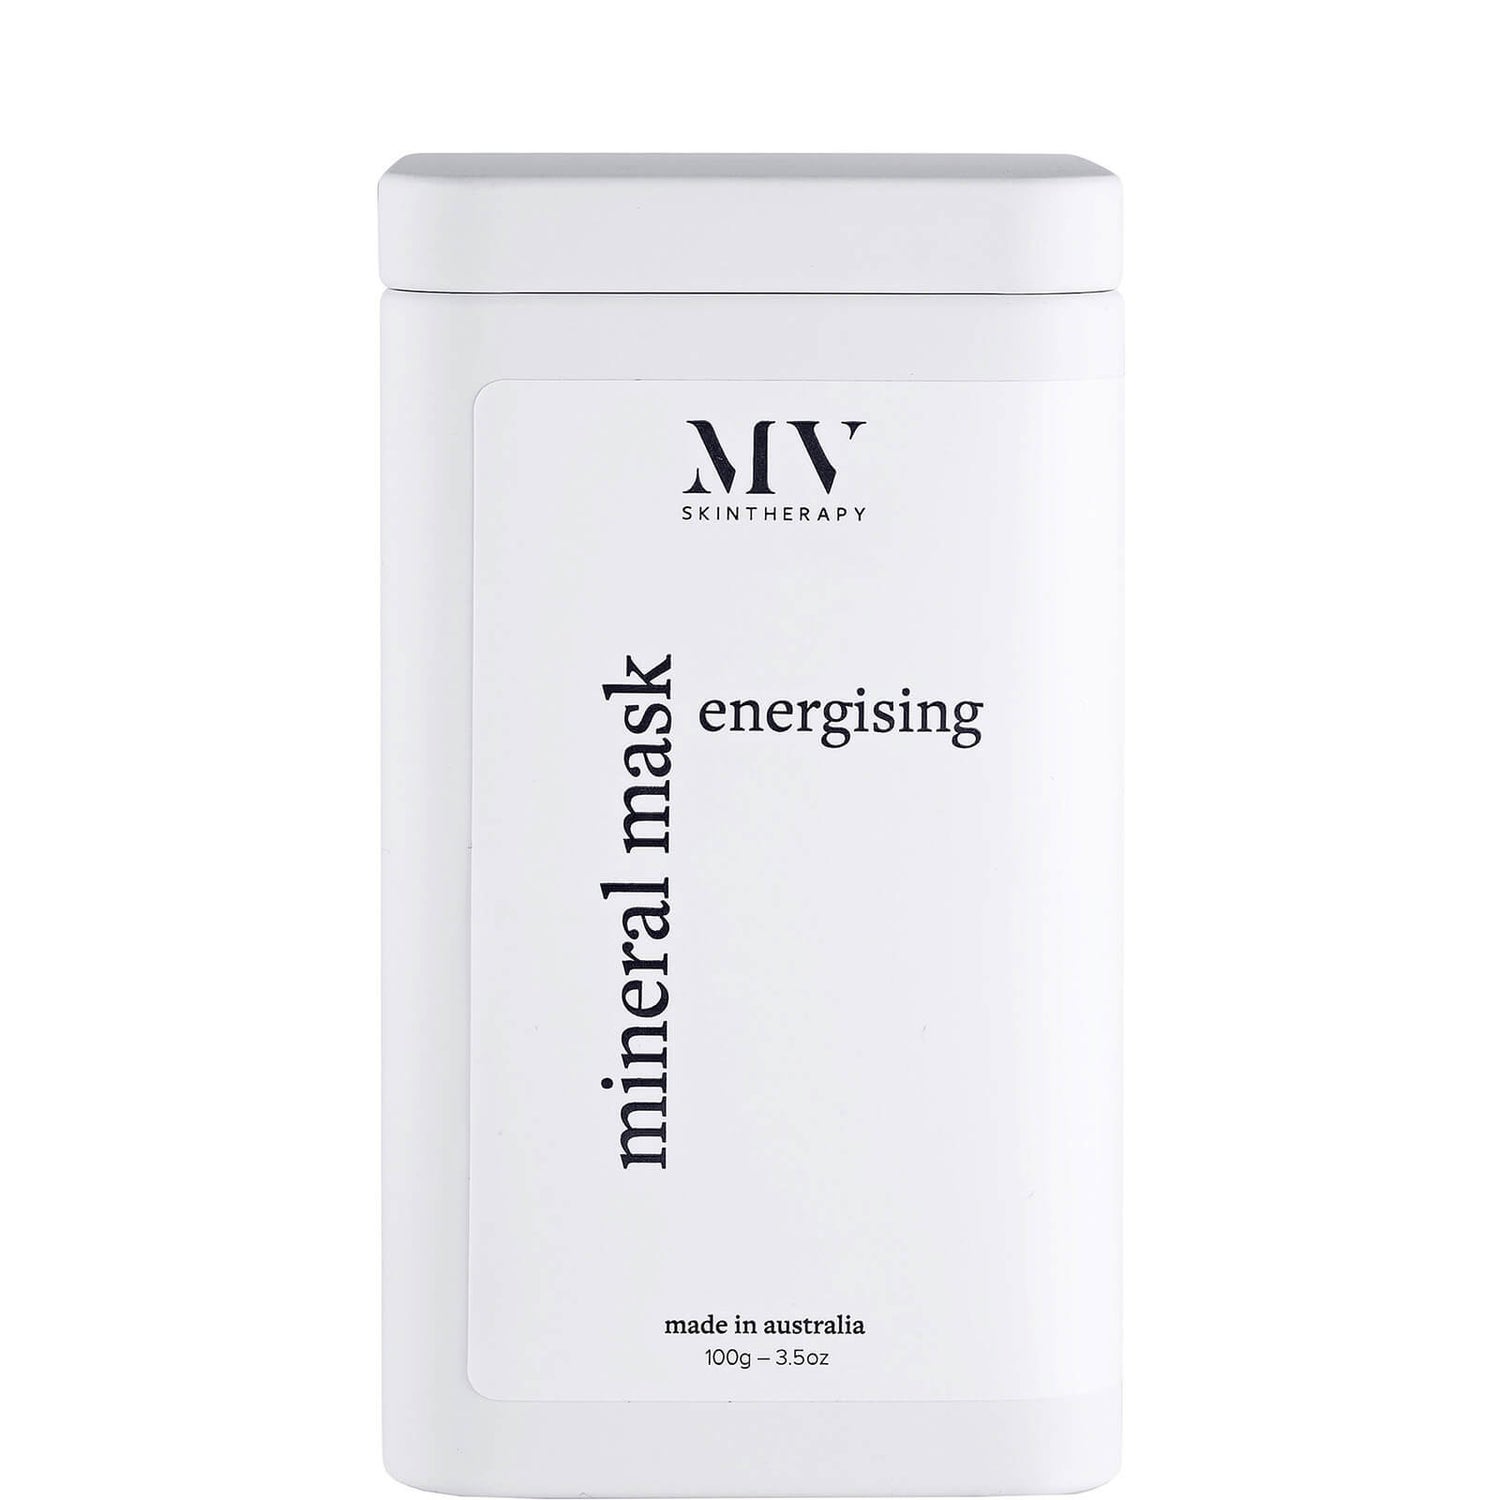 MV Skintherapy Energising Mineral Mask